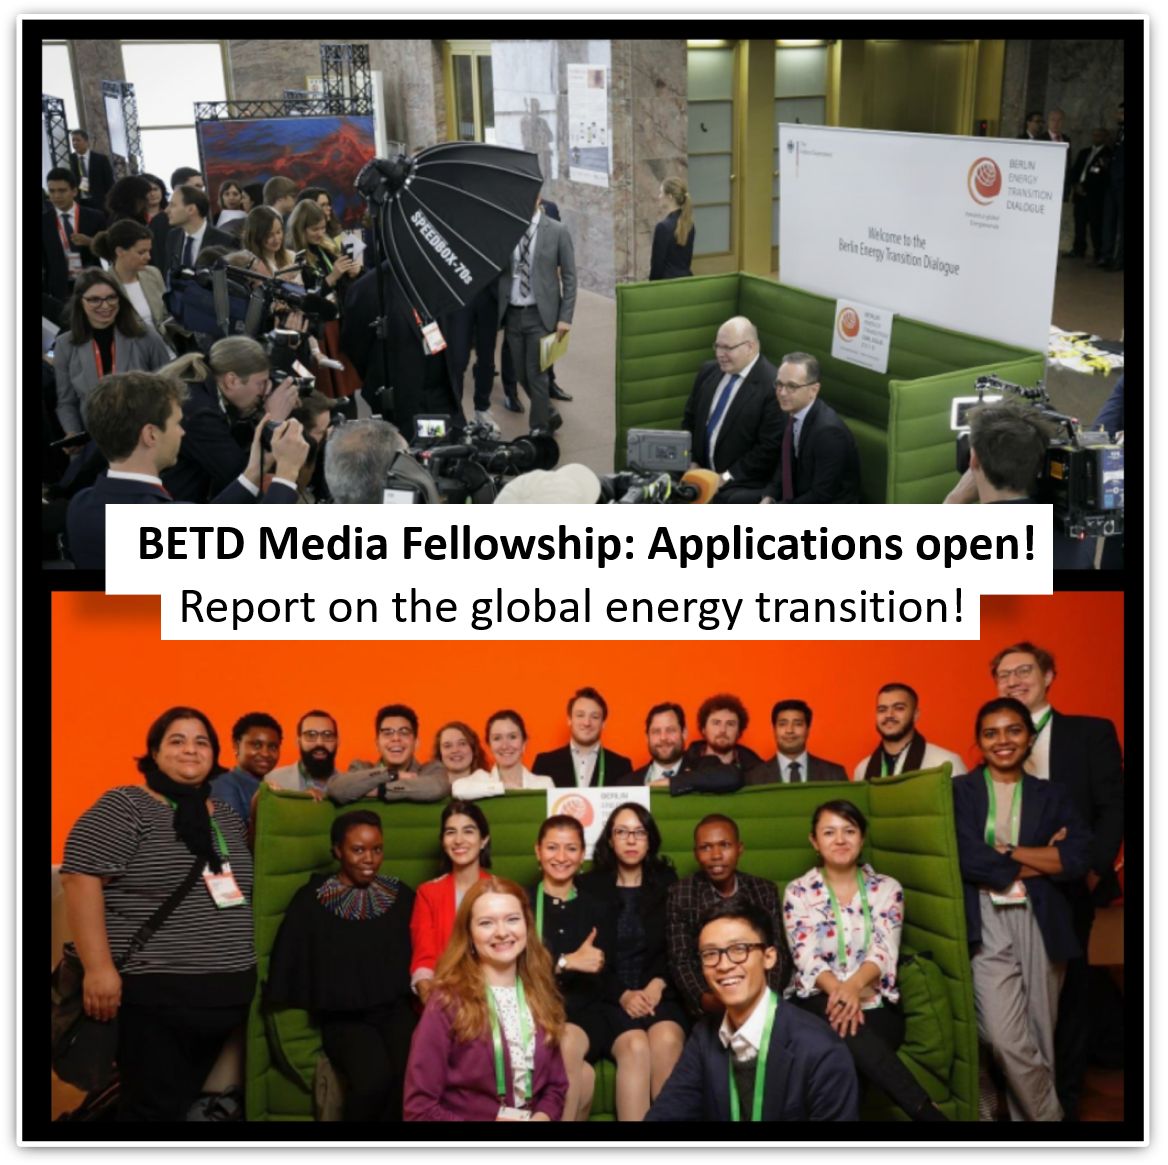 Young journalists all over the 🌍: Meet key stakeholders of the global #energytransition during 'Berlin Energy Transition Dialogue 2020' in March & report on #BETD2020. Apply until Feb 2nd for the #MediaFellowship 👉fellows.energydialogue.berlin

@GermanyDiplo @greensofa_betd